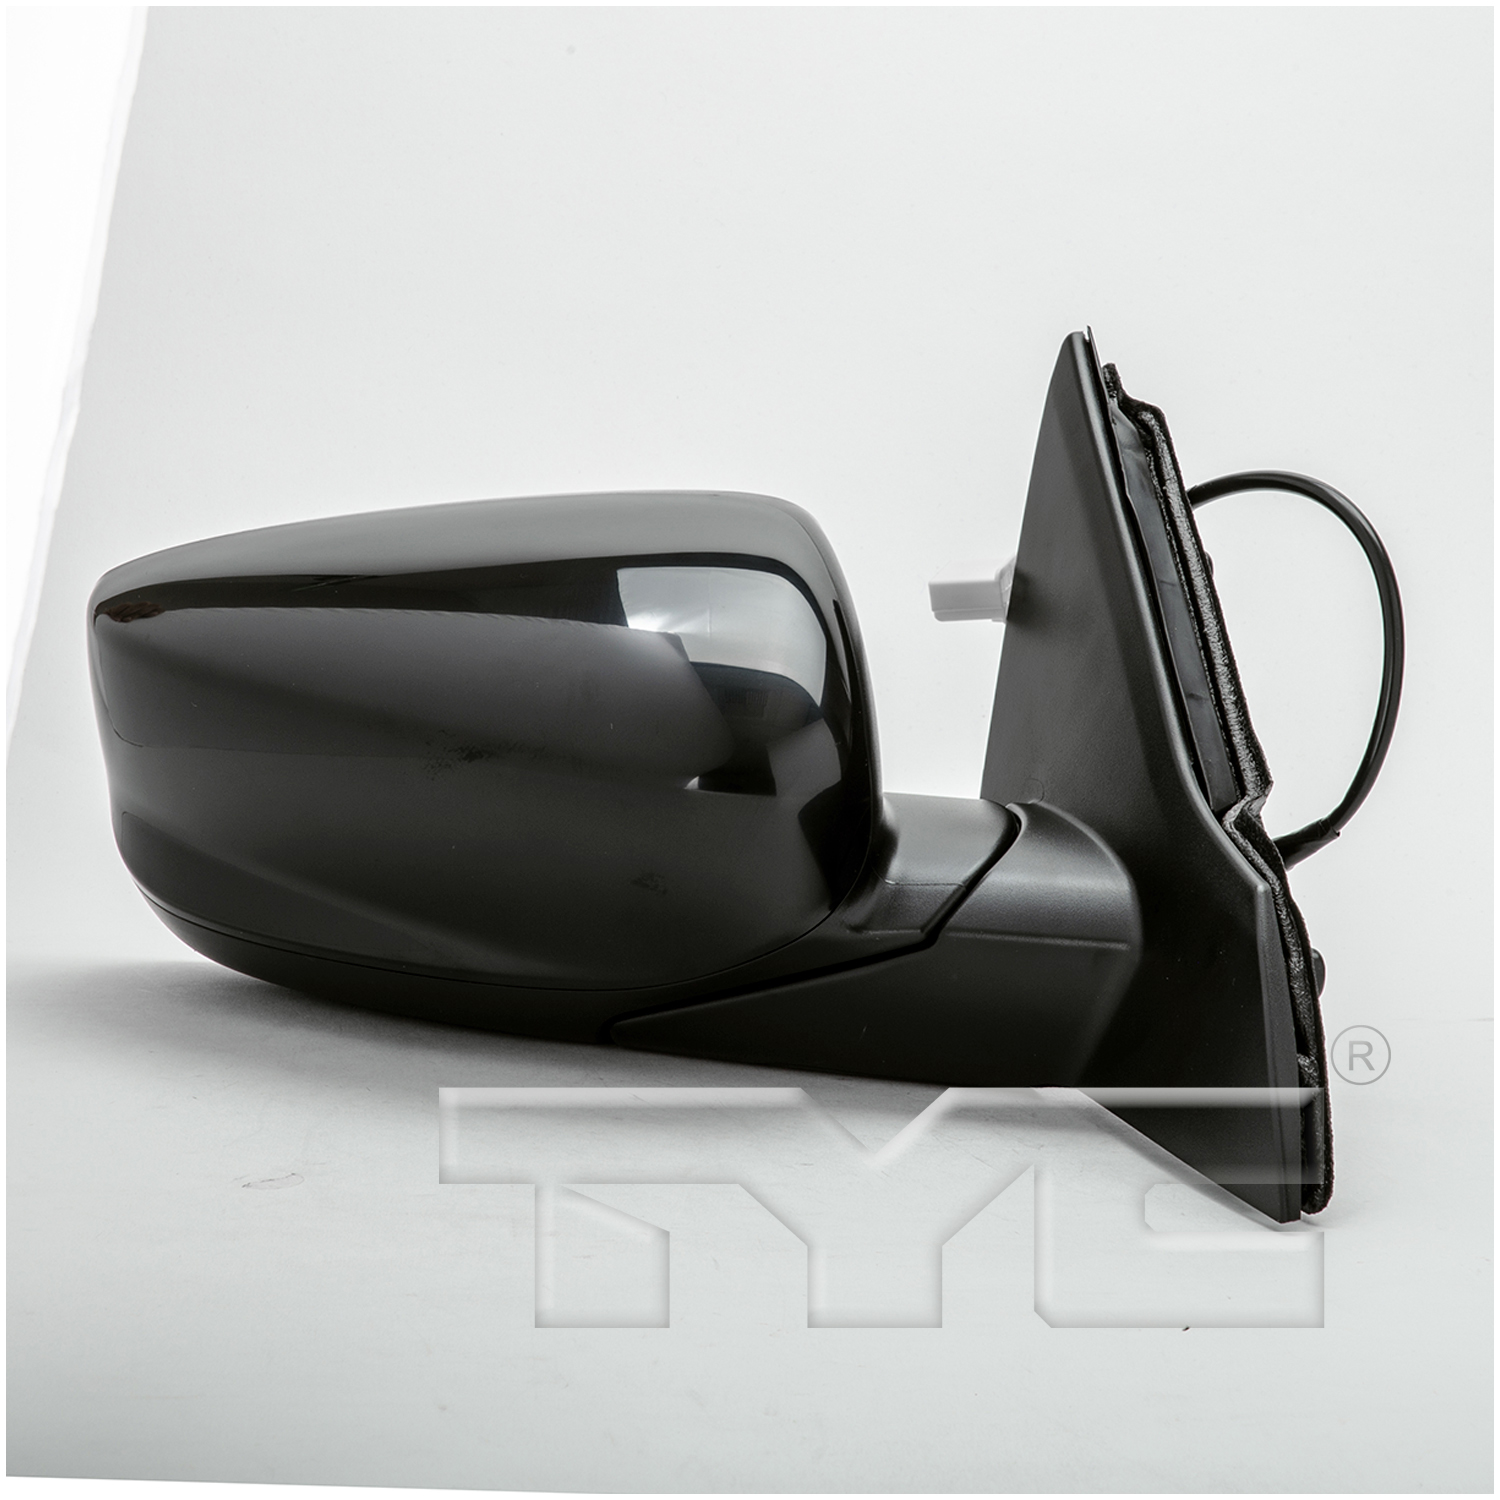 Aftermarket MIRRORS for HONDA - ACCORD, ACCORD,13-13,RT Mirror outside rear view